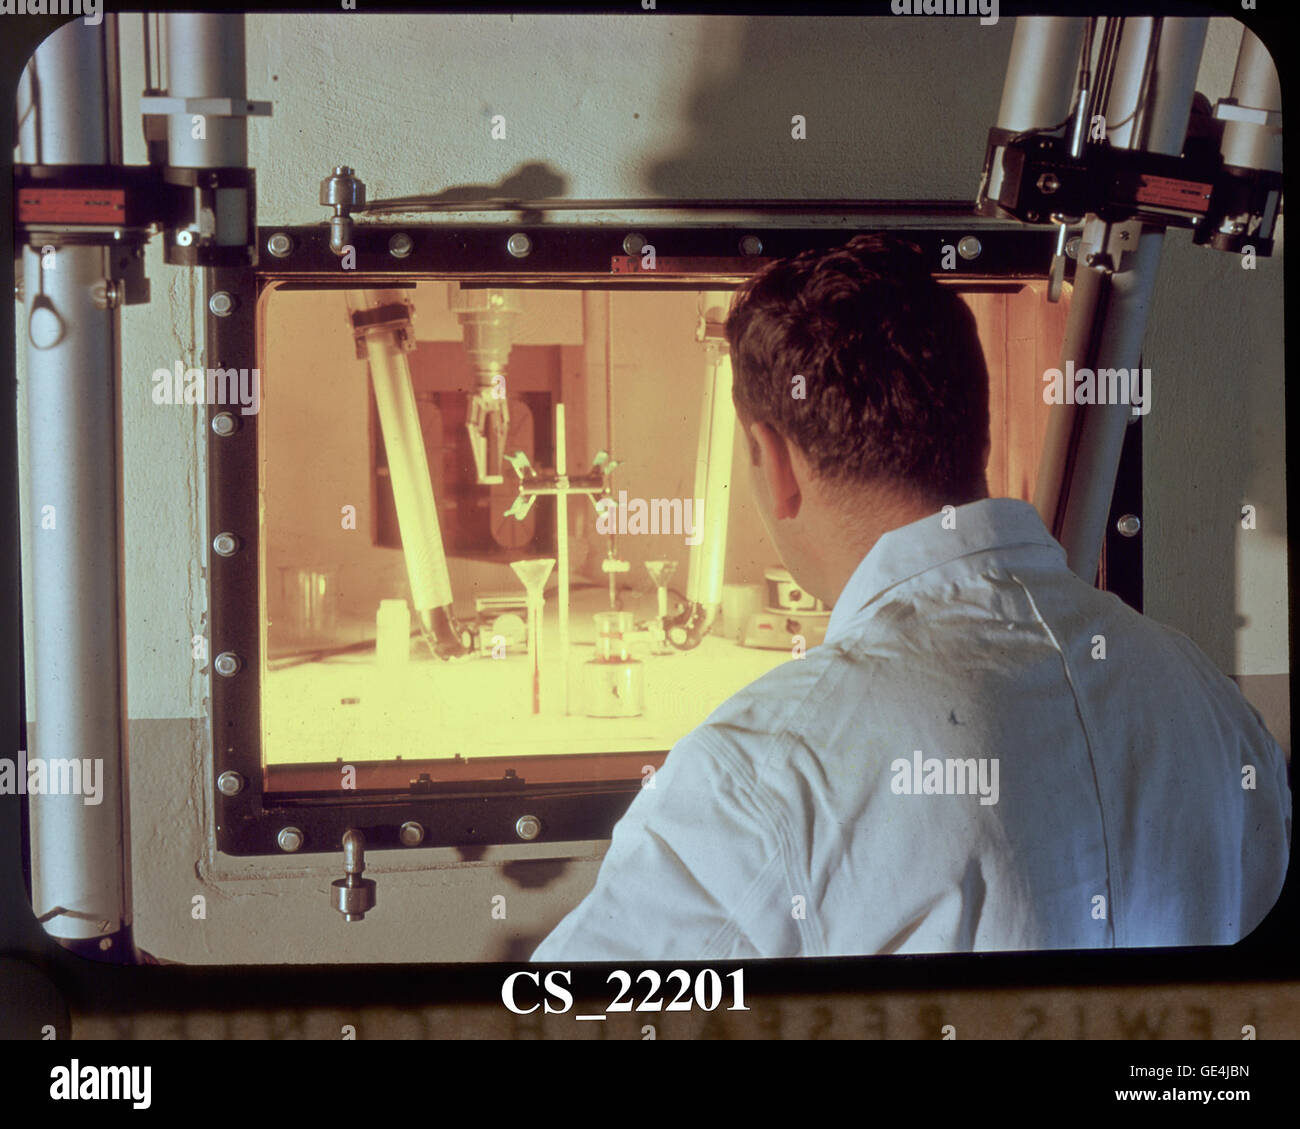 View into a hot laboratory. Technician Dan Gardner examines irradiated materials using remotely controlled manipulator arms from behind protective walls and shielded windows.  Image # : CS-22201 Stock Photo